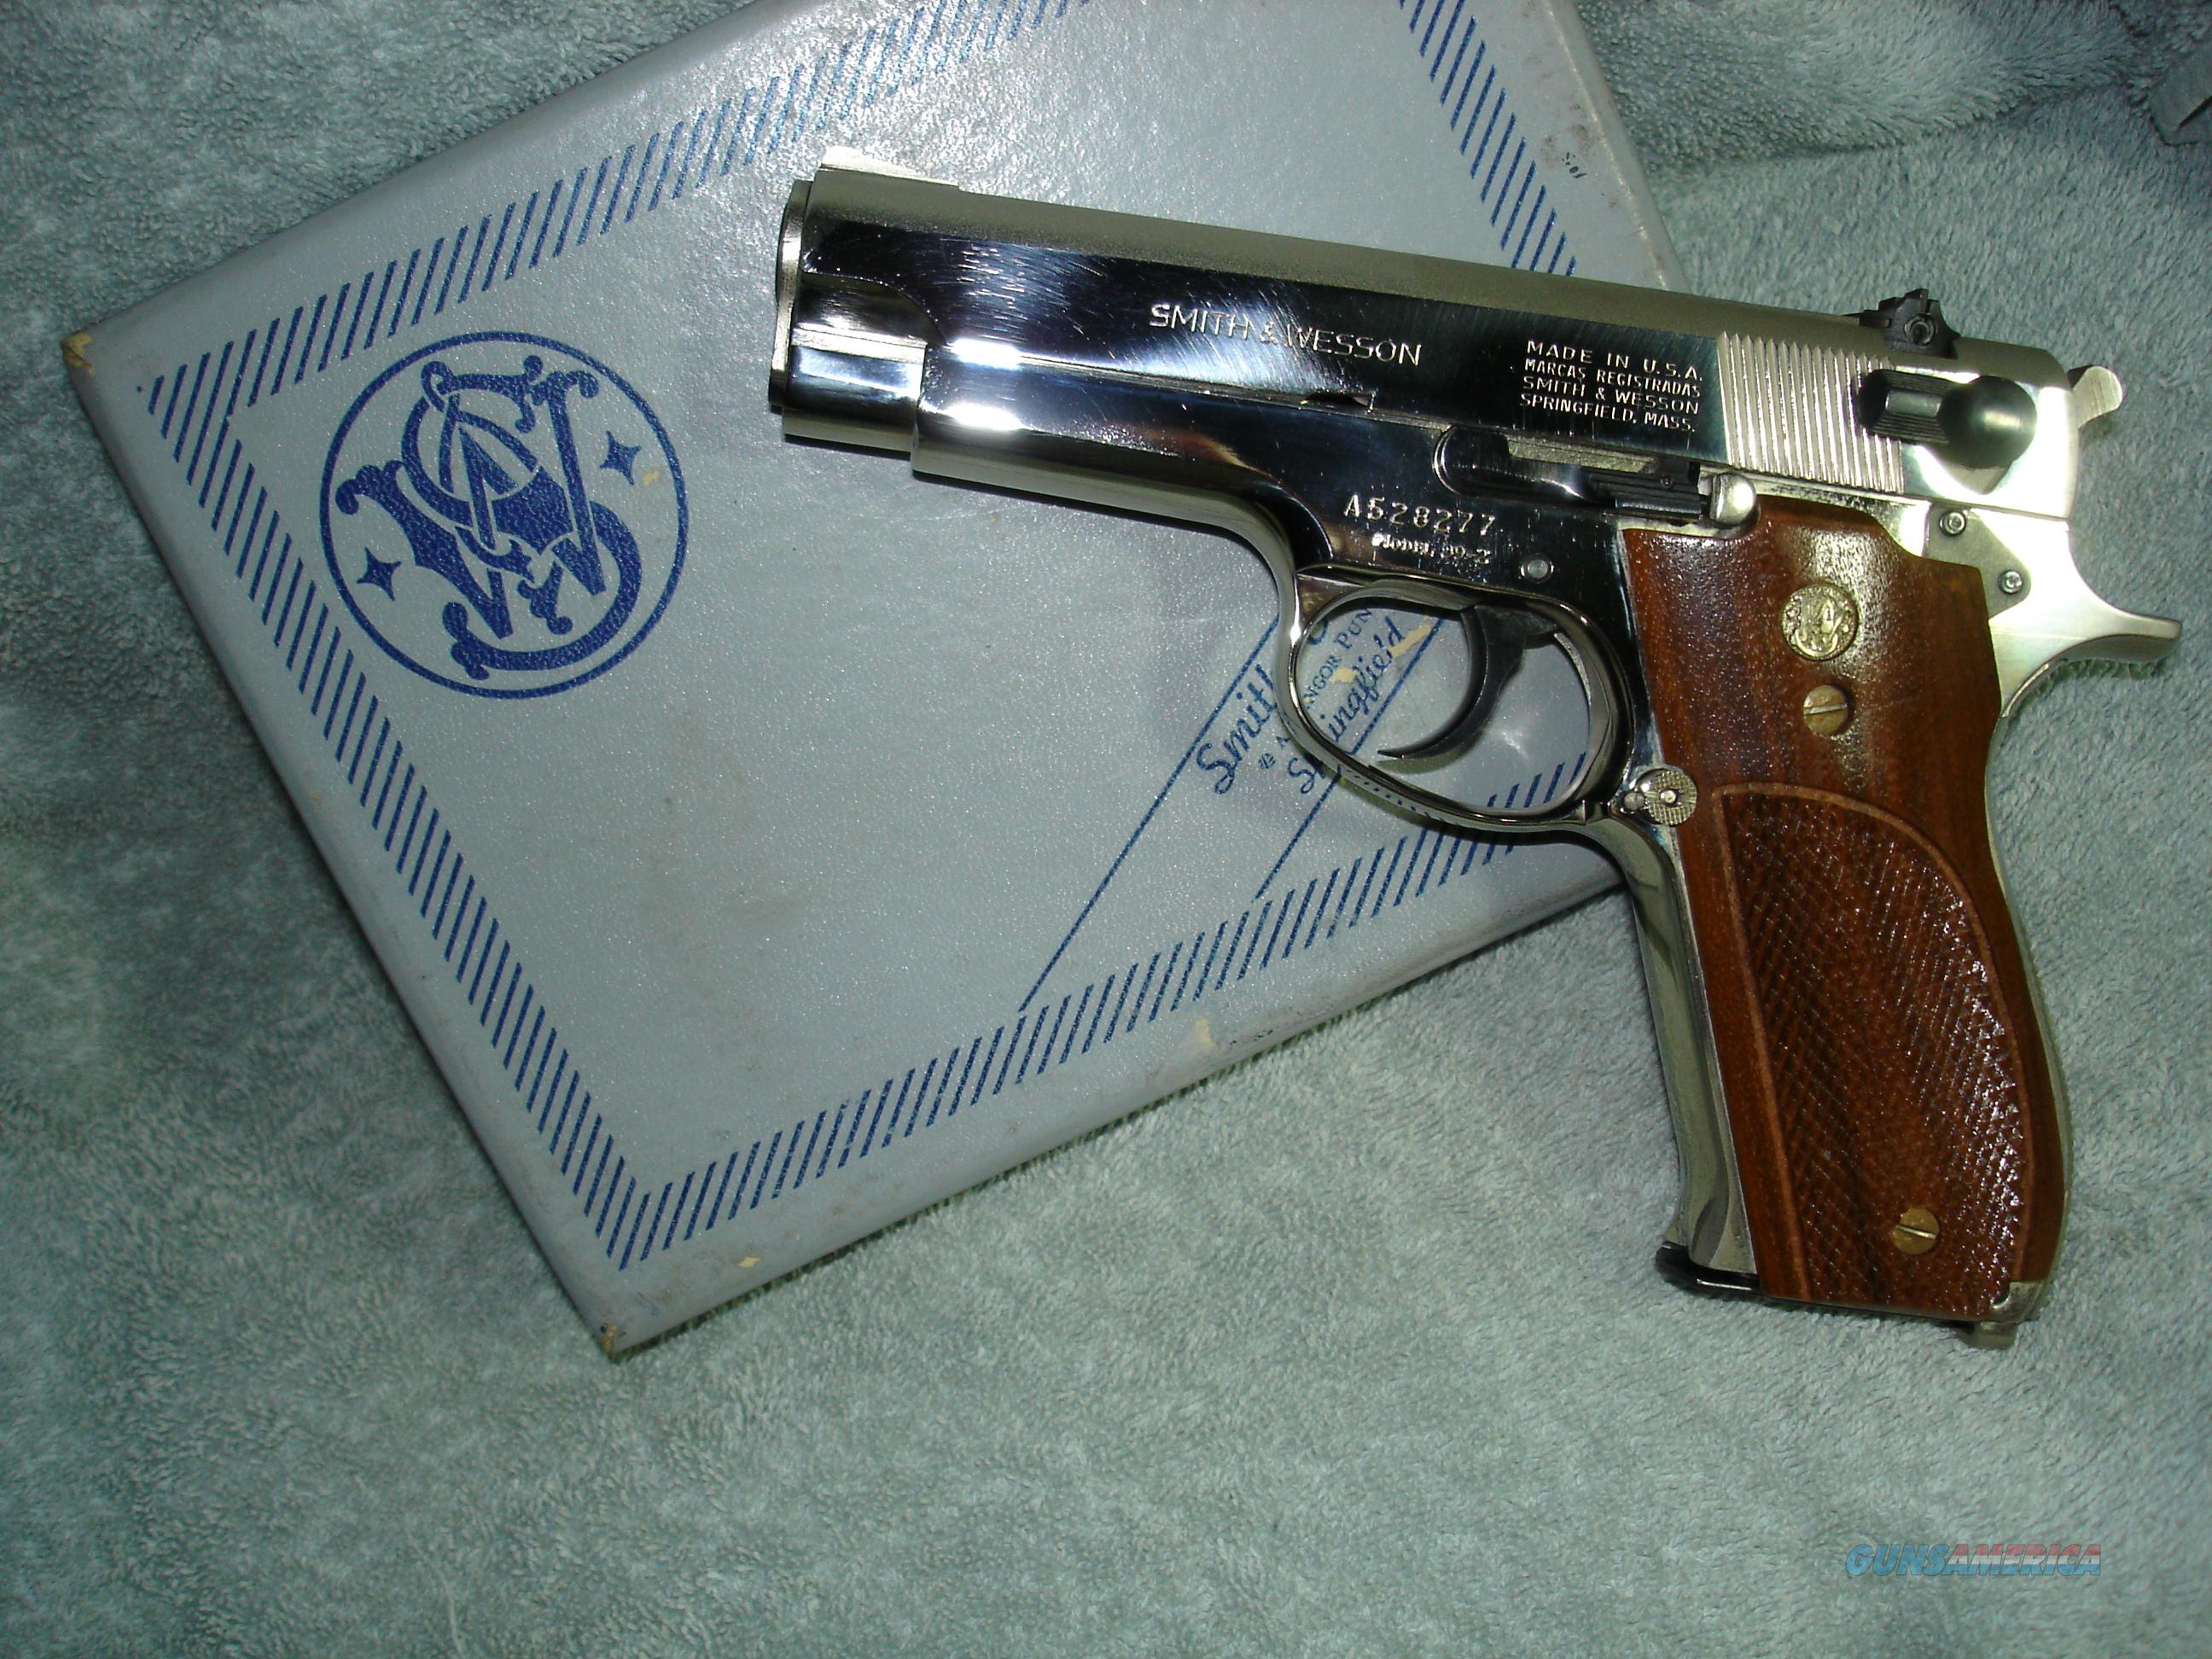 Smith & Wesson Pistol #26